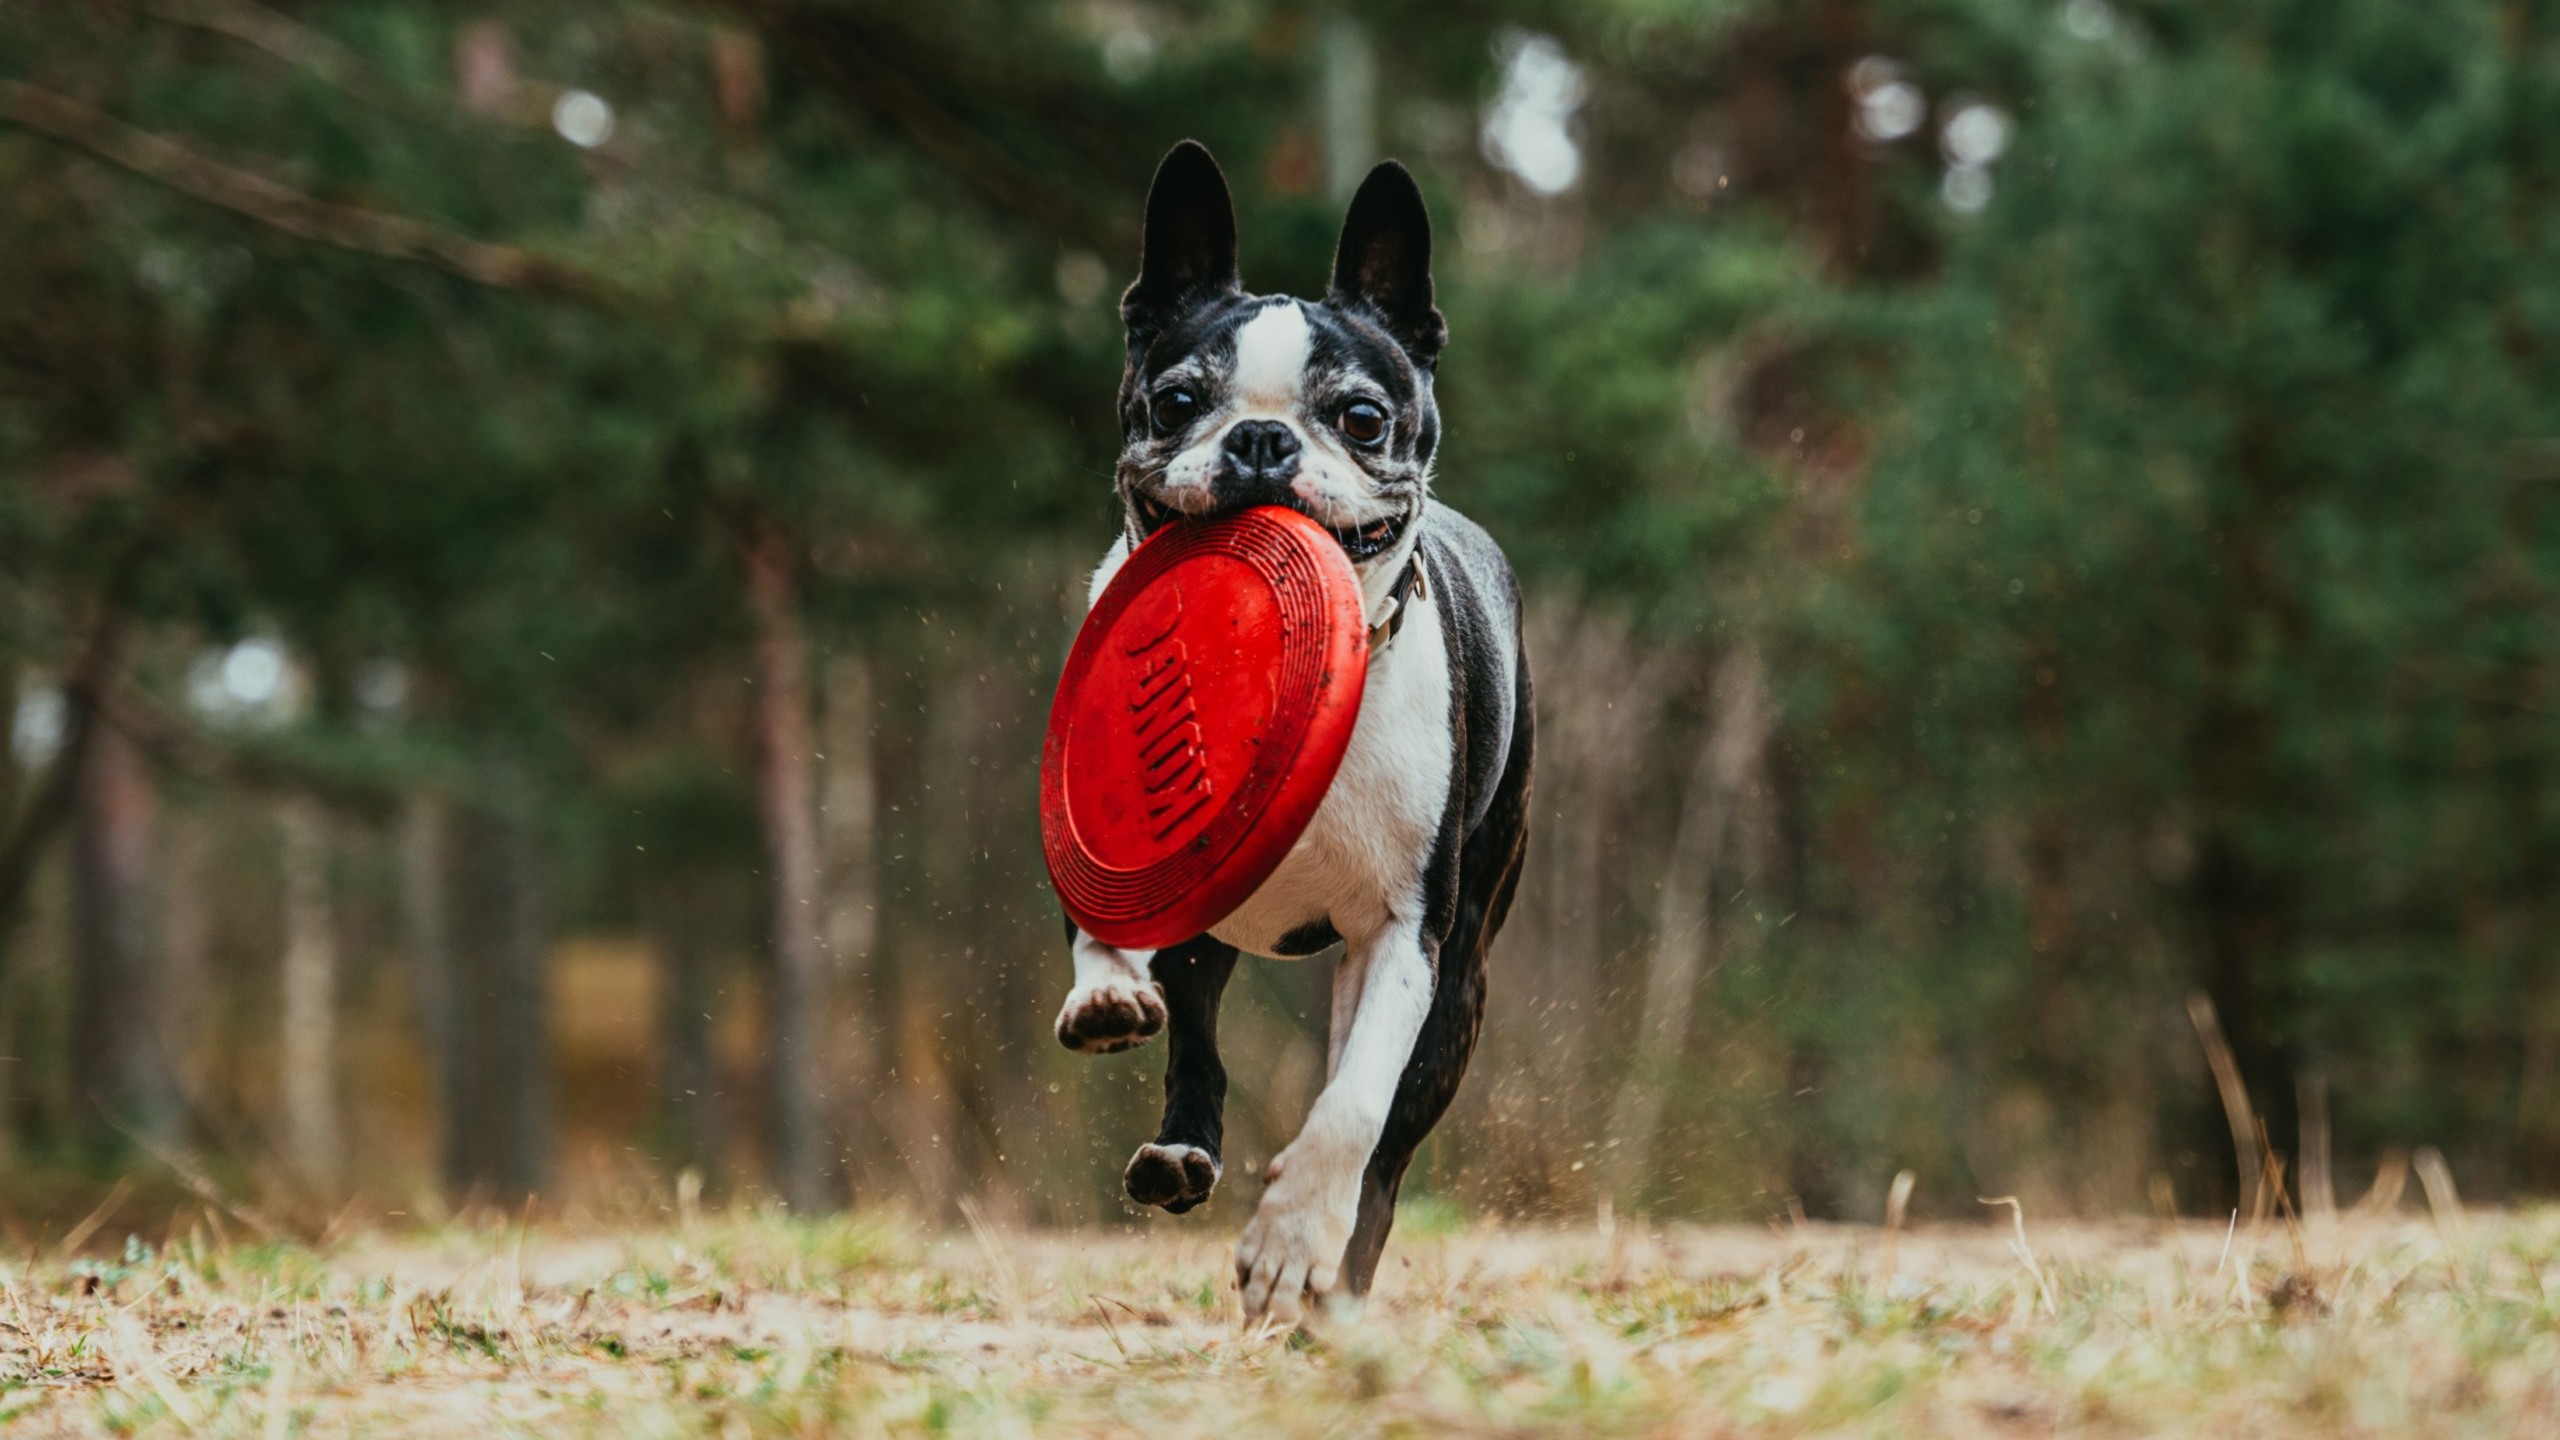 Boston terrier running with frisbee in mouth